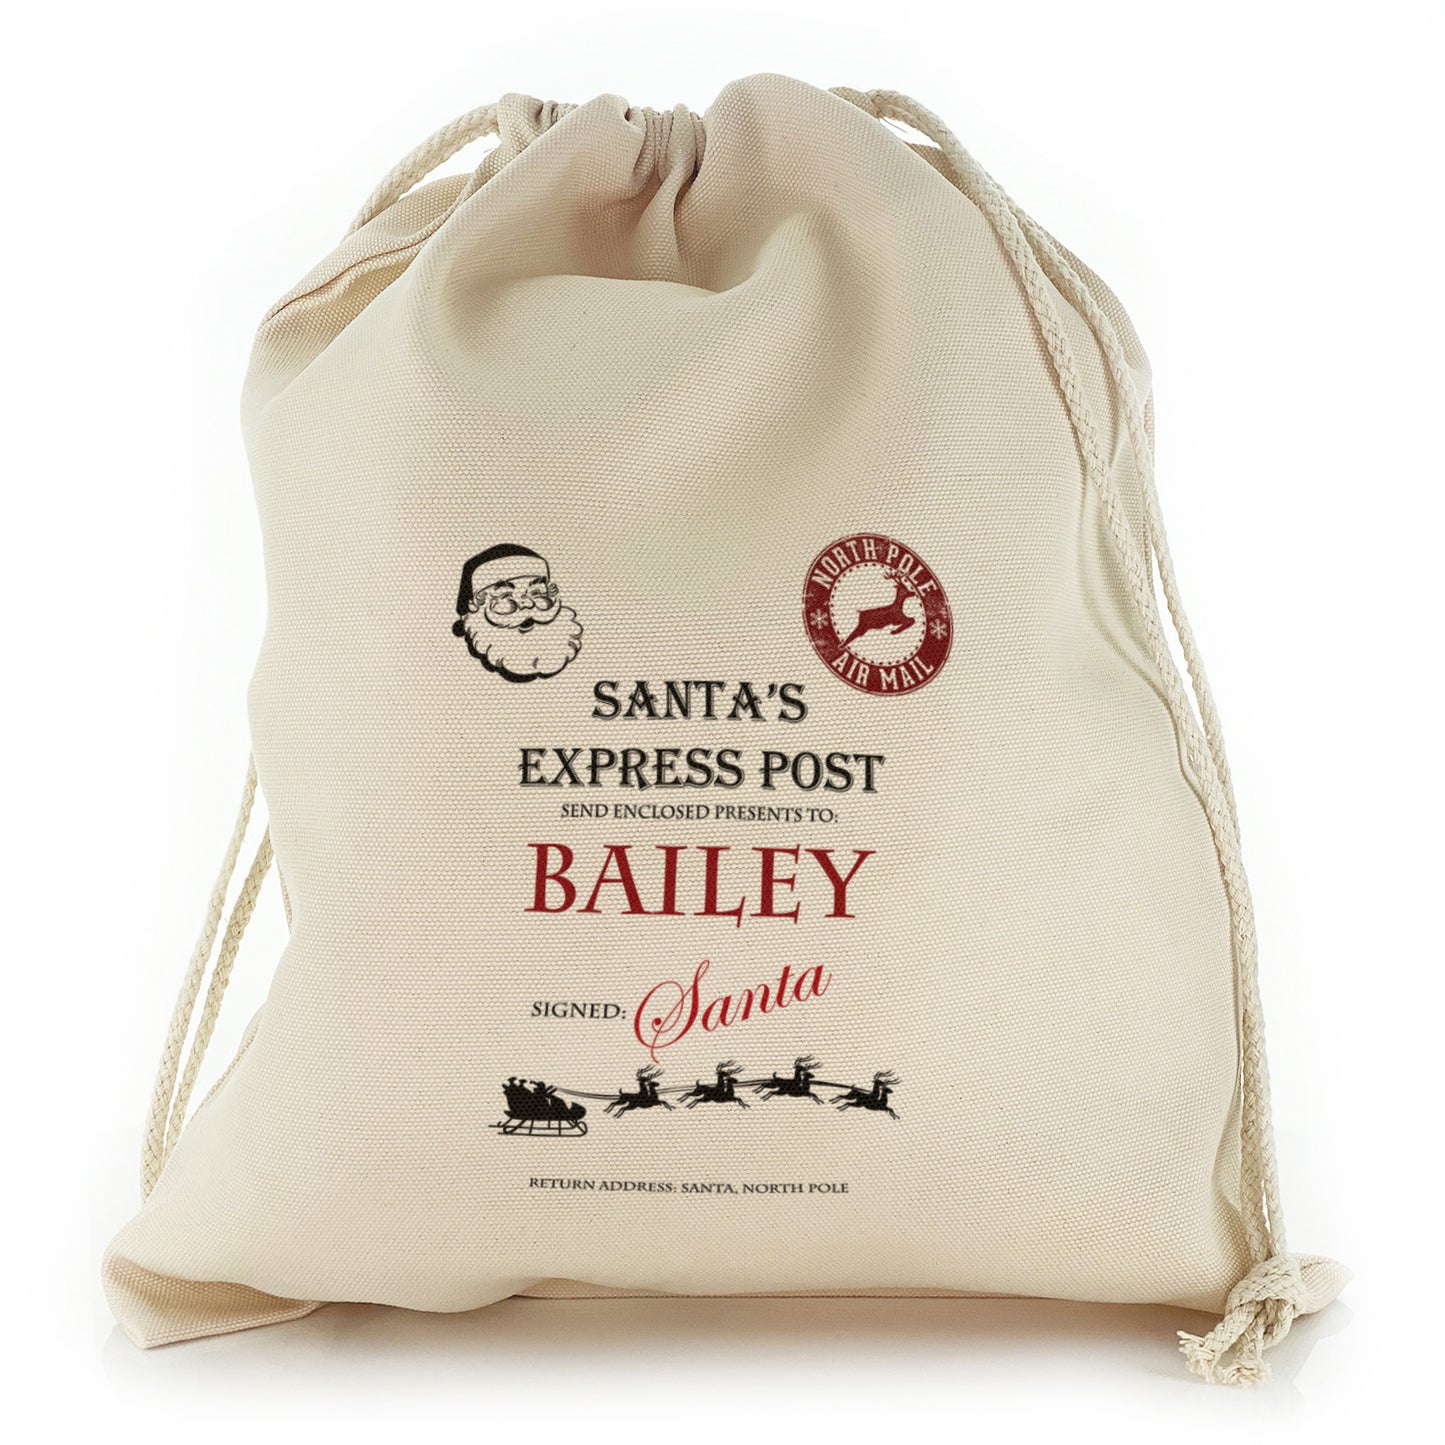 Personalised Canvas Sack with Childs Name on Santa Signed Express Post